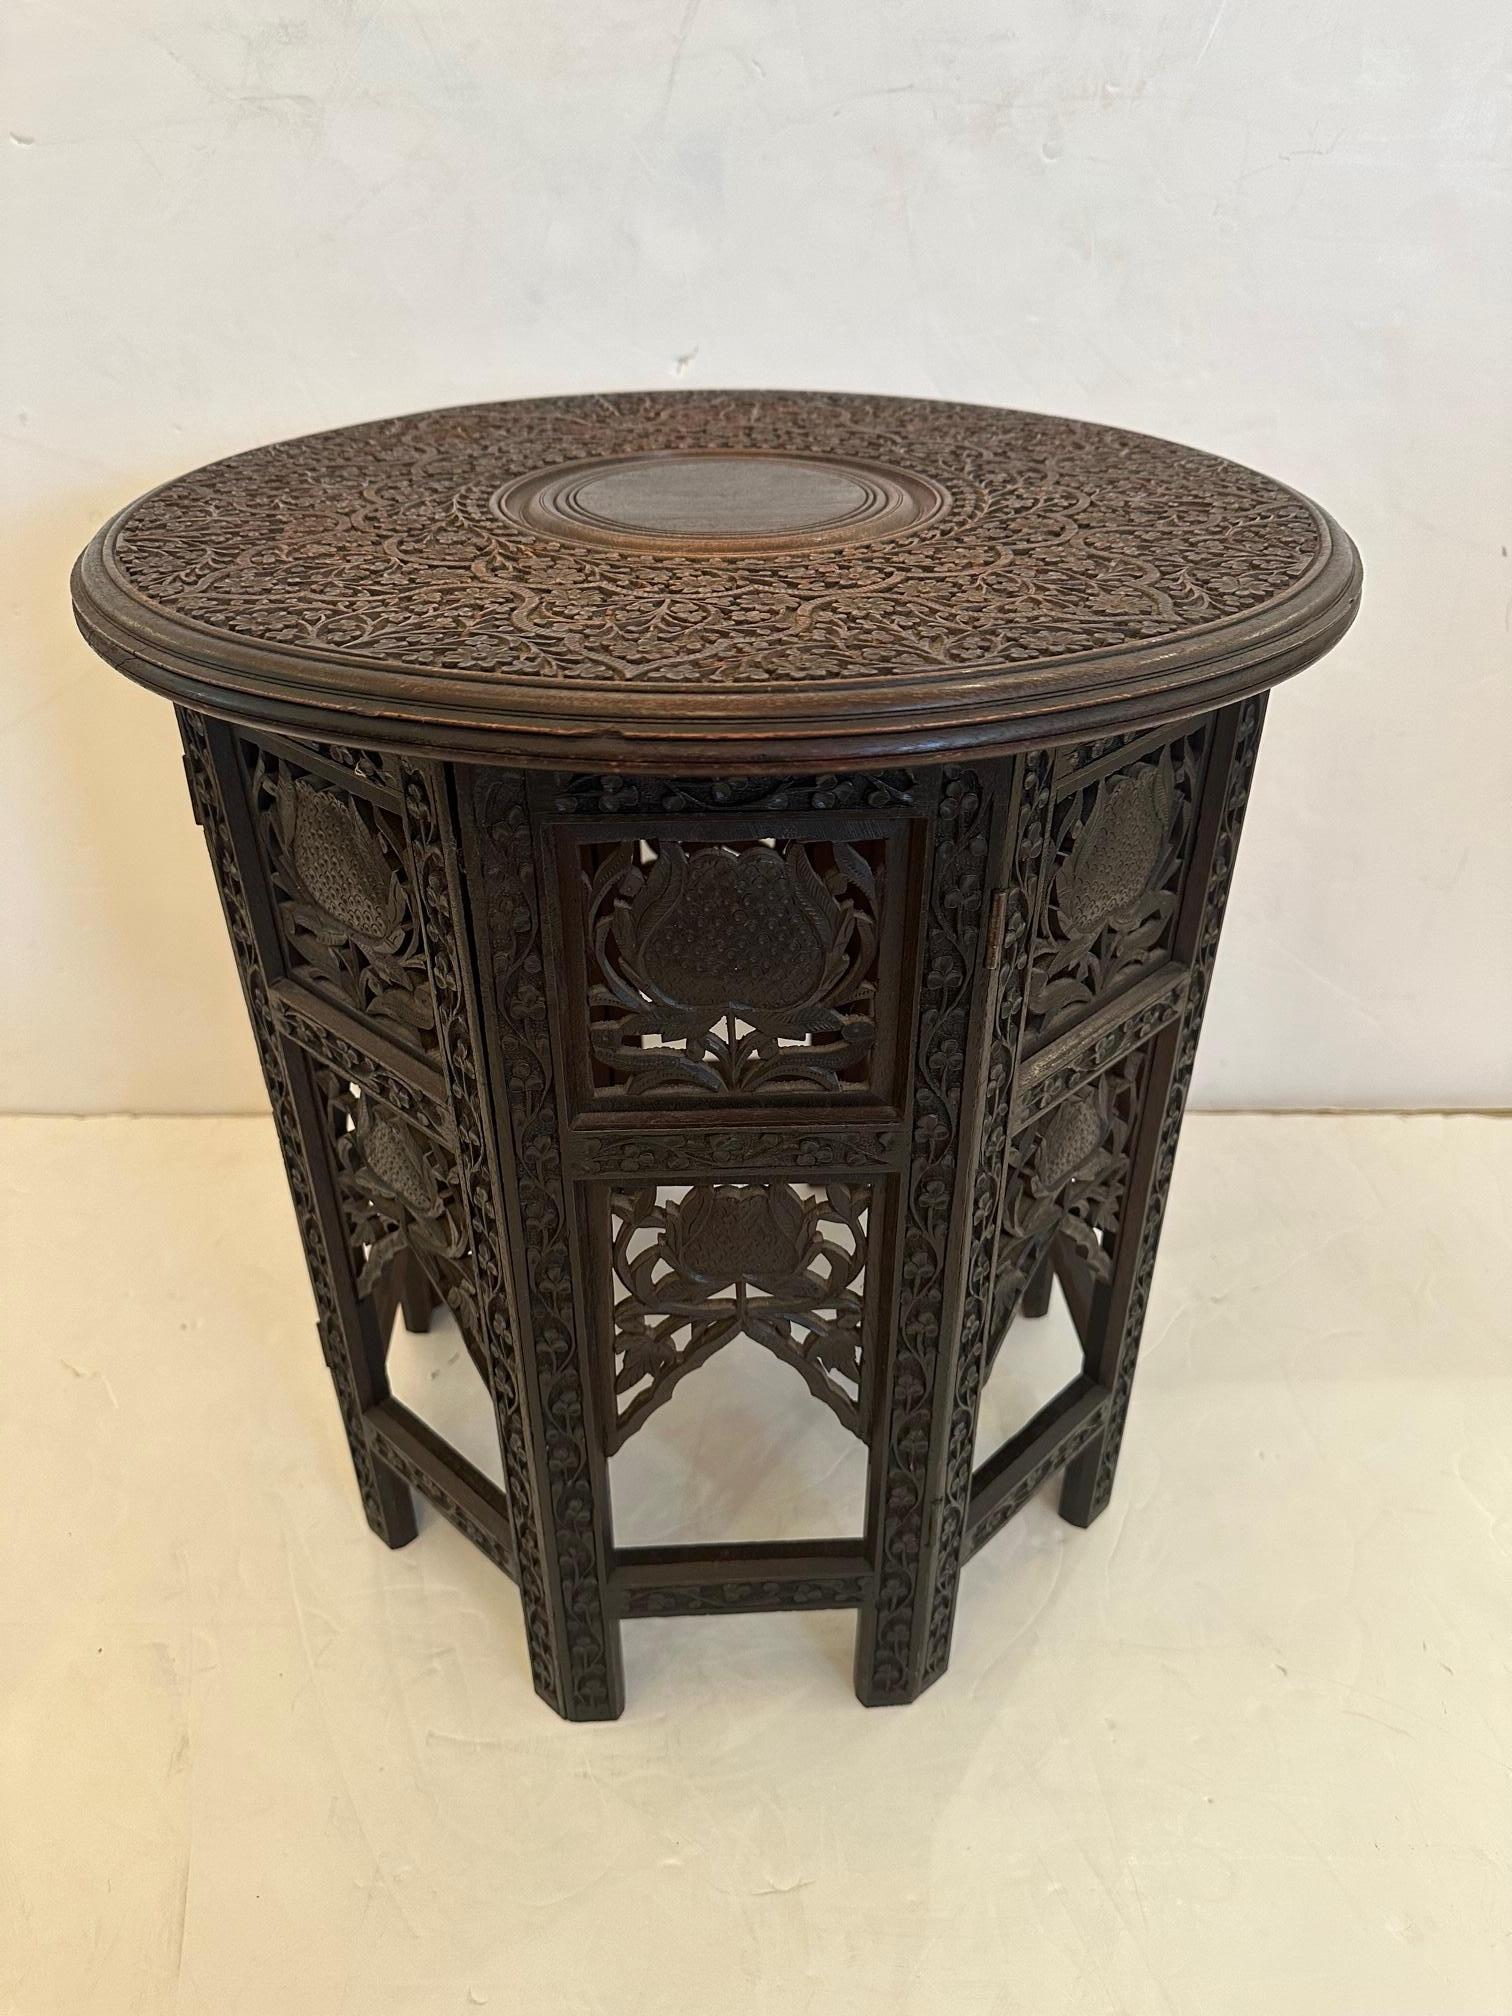 Classic Anglo Indian beautifully carved wood round side or end table having meticulous intricate details. Top is removeable and base folds in on itself for easy shipping.